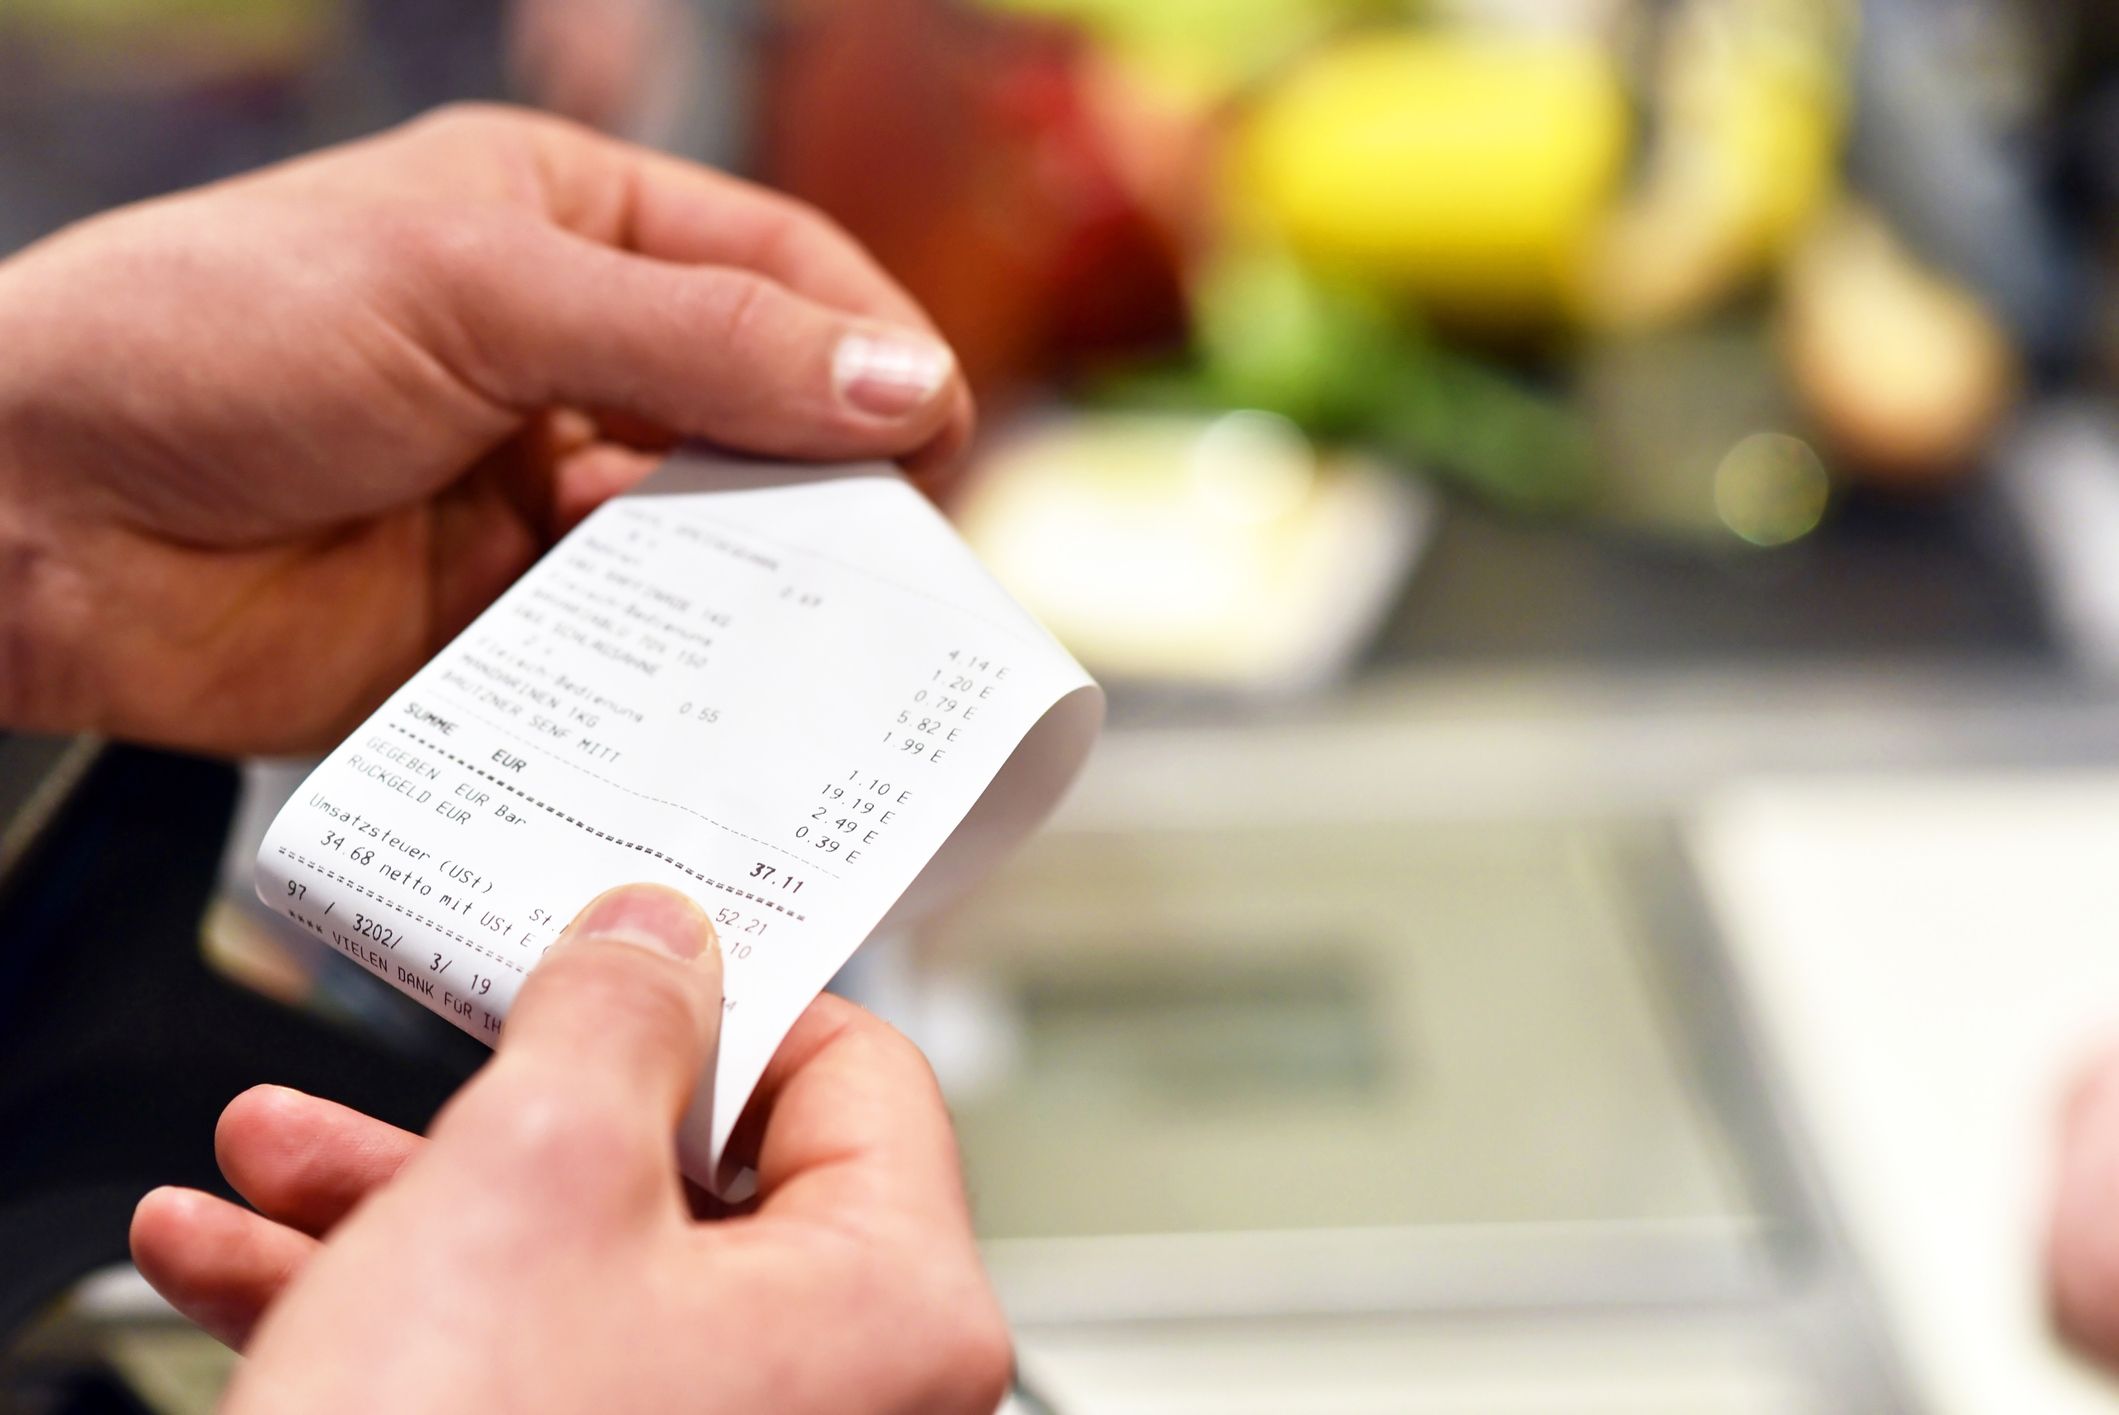 Handling receipts for an extended period of time is associated with an increase in BPA levels 